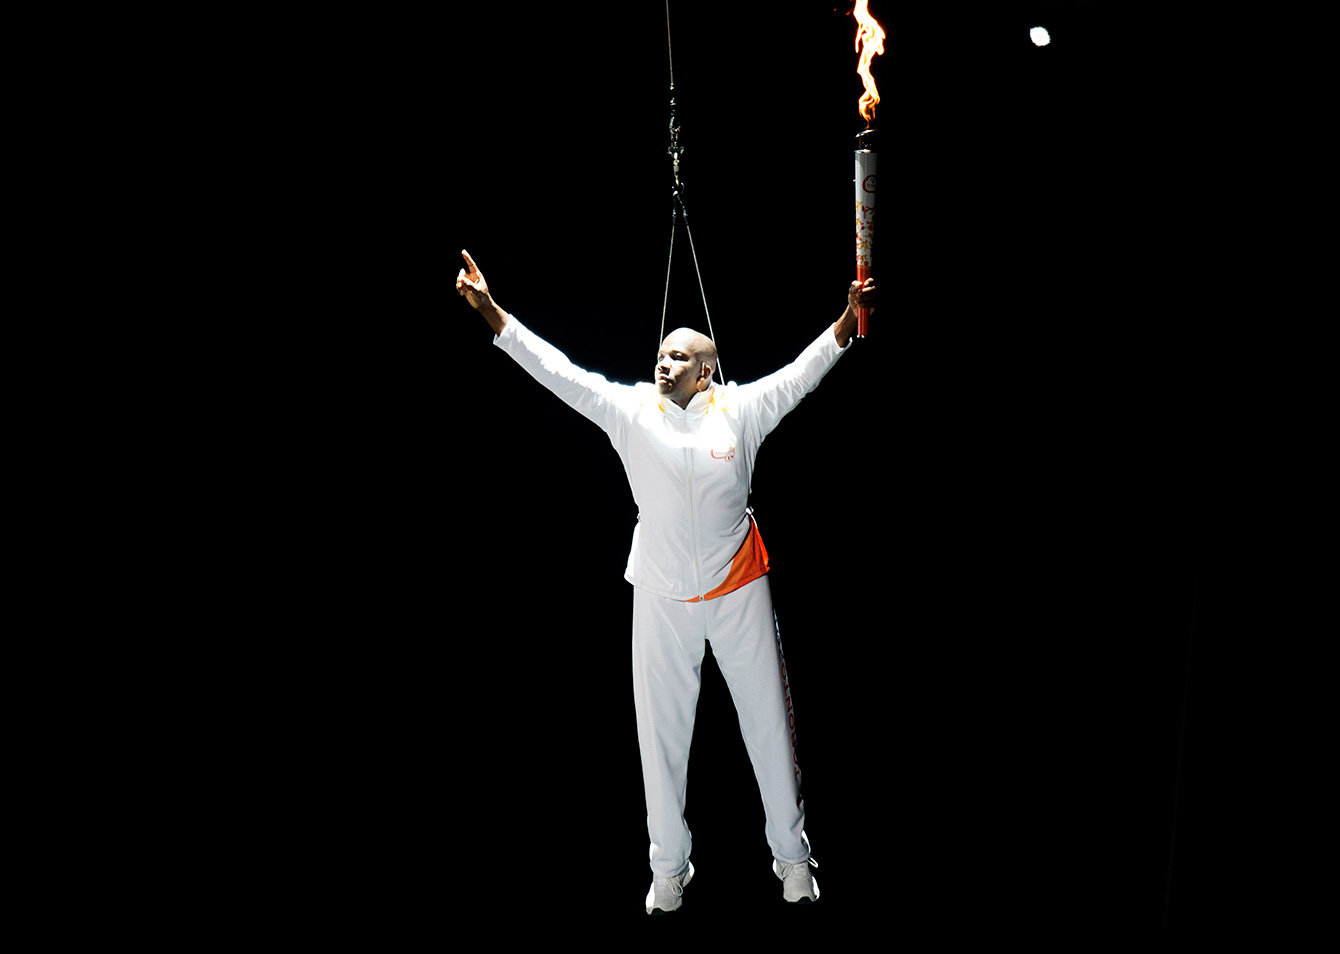 Donovan Bailey brings the Pan Am flame into the Opening Ceremony of the Toronto 2015 Pan American Games.